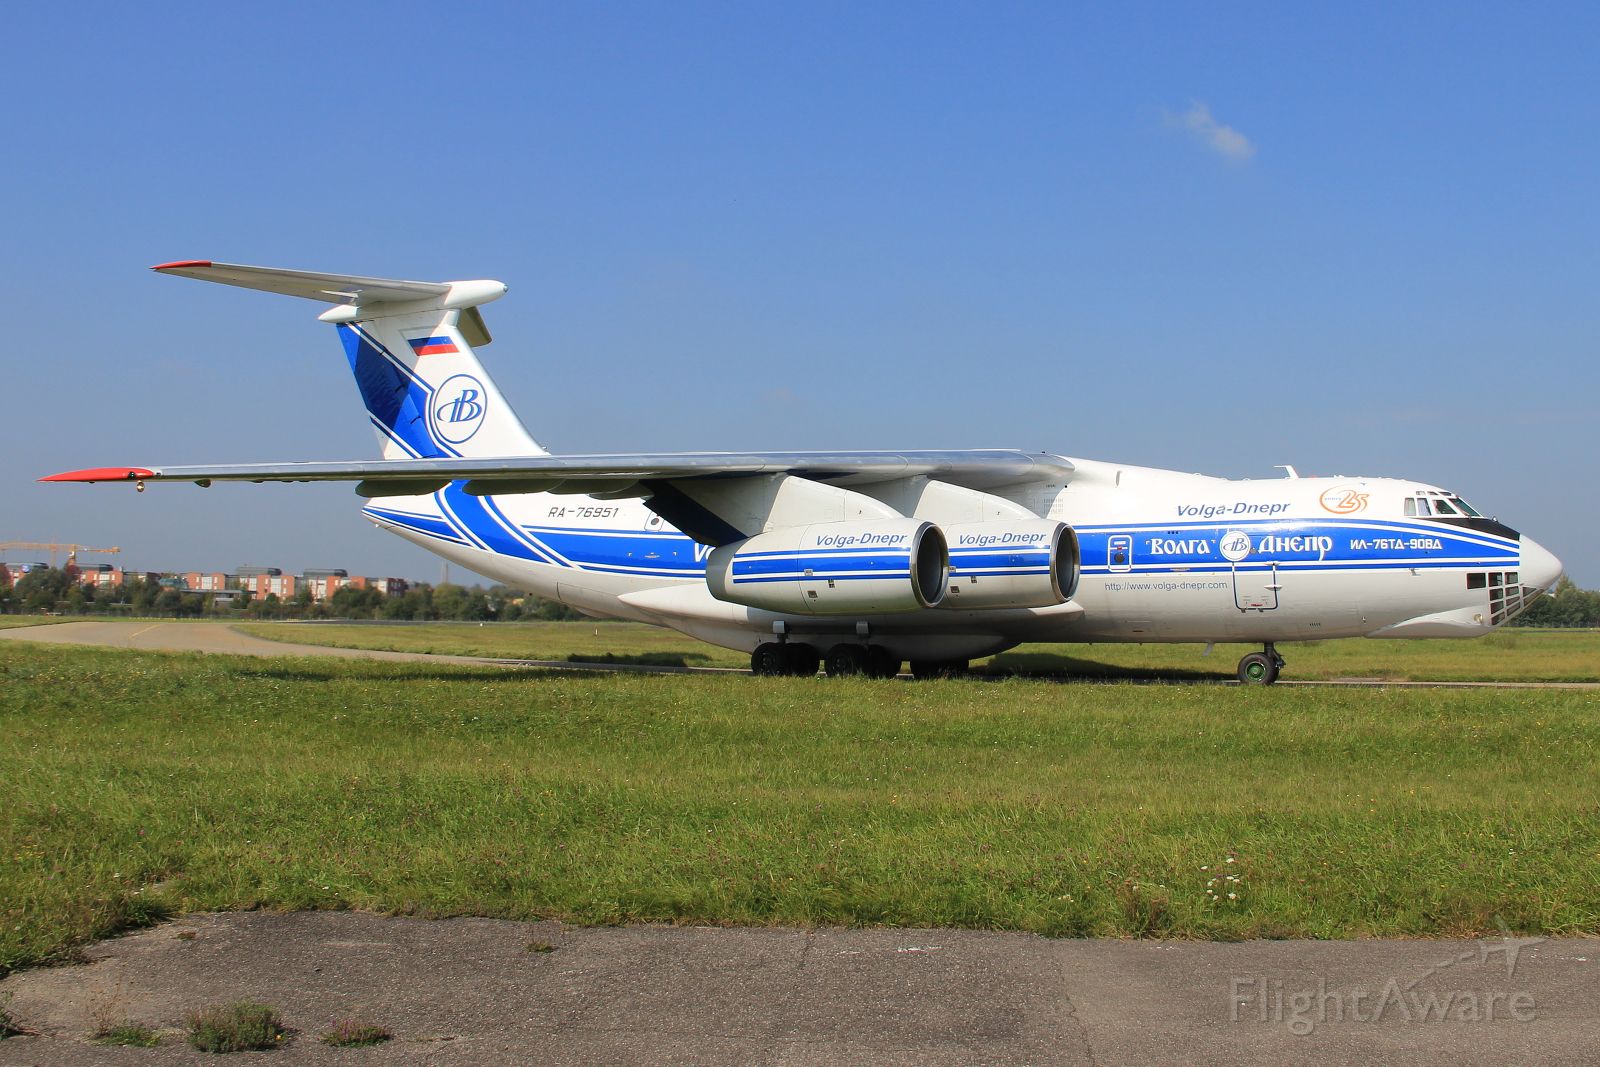 Ilyushin Il-76 (RA-76951) - brought other Boeing parts of the old Lufthansa Boeing 737-200 D-ABCE "Landshut" which was hijacked in 1977